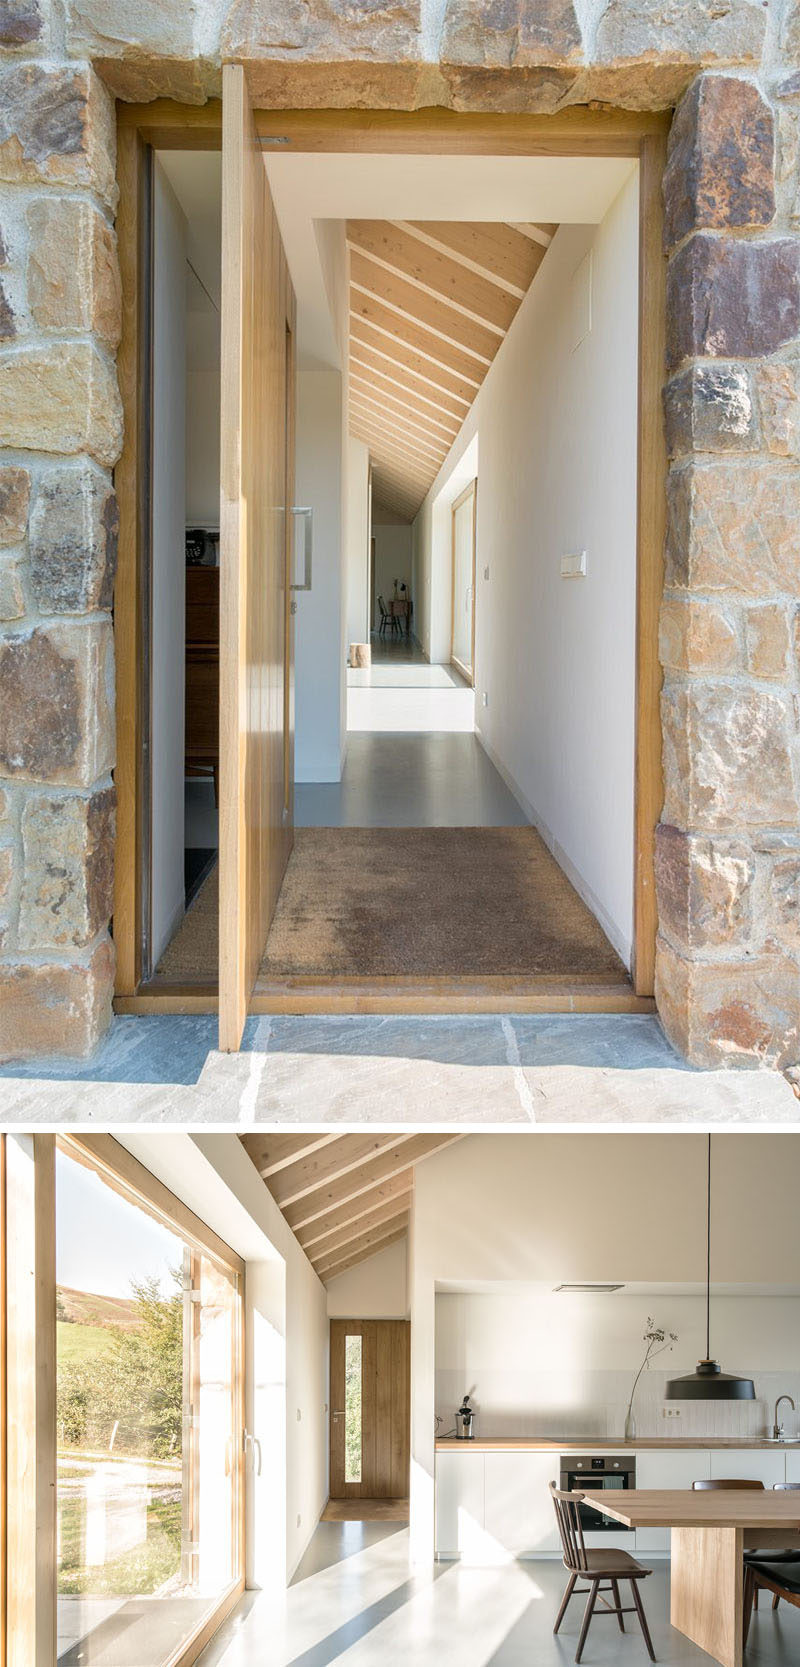 The rough exterior stone-walls and roof of this stone cottage contrast the bright white and wood contemporary interior. #StoneCottage #ContemporaryCottage